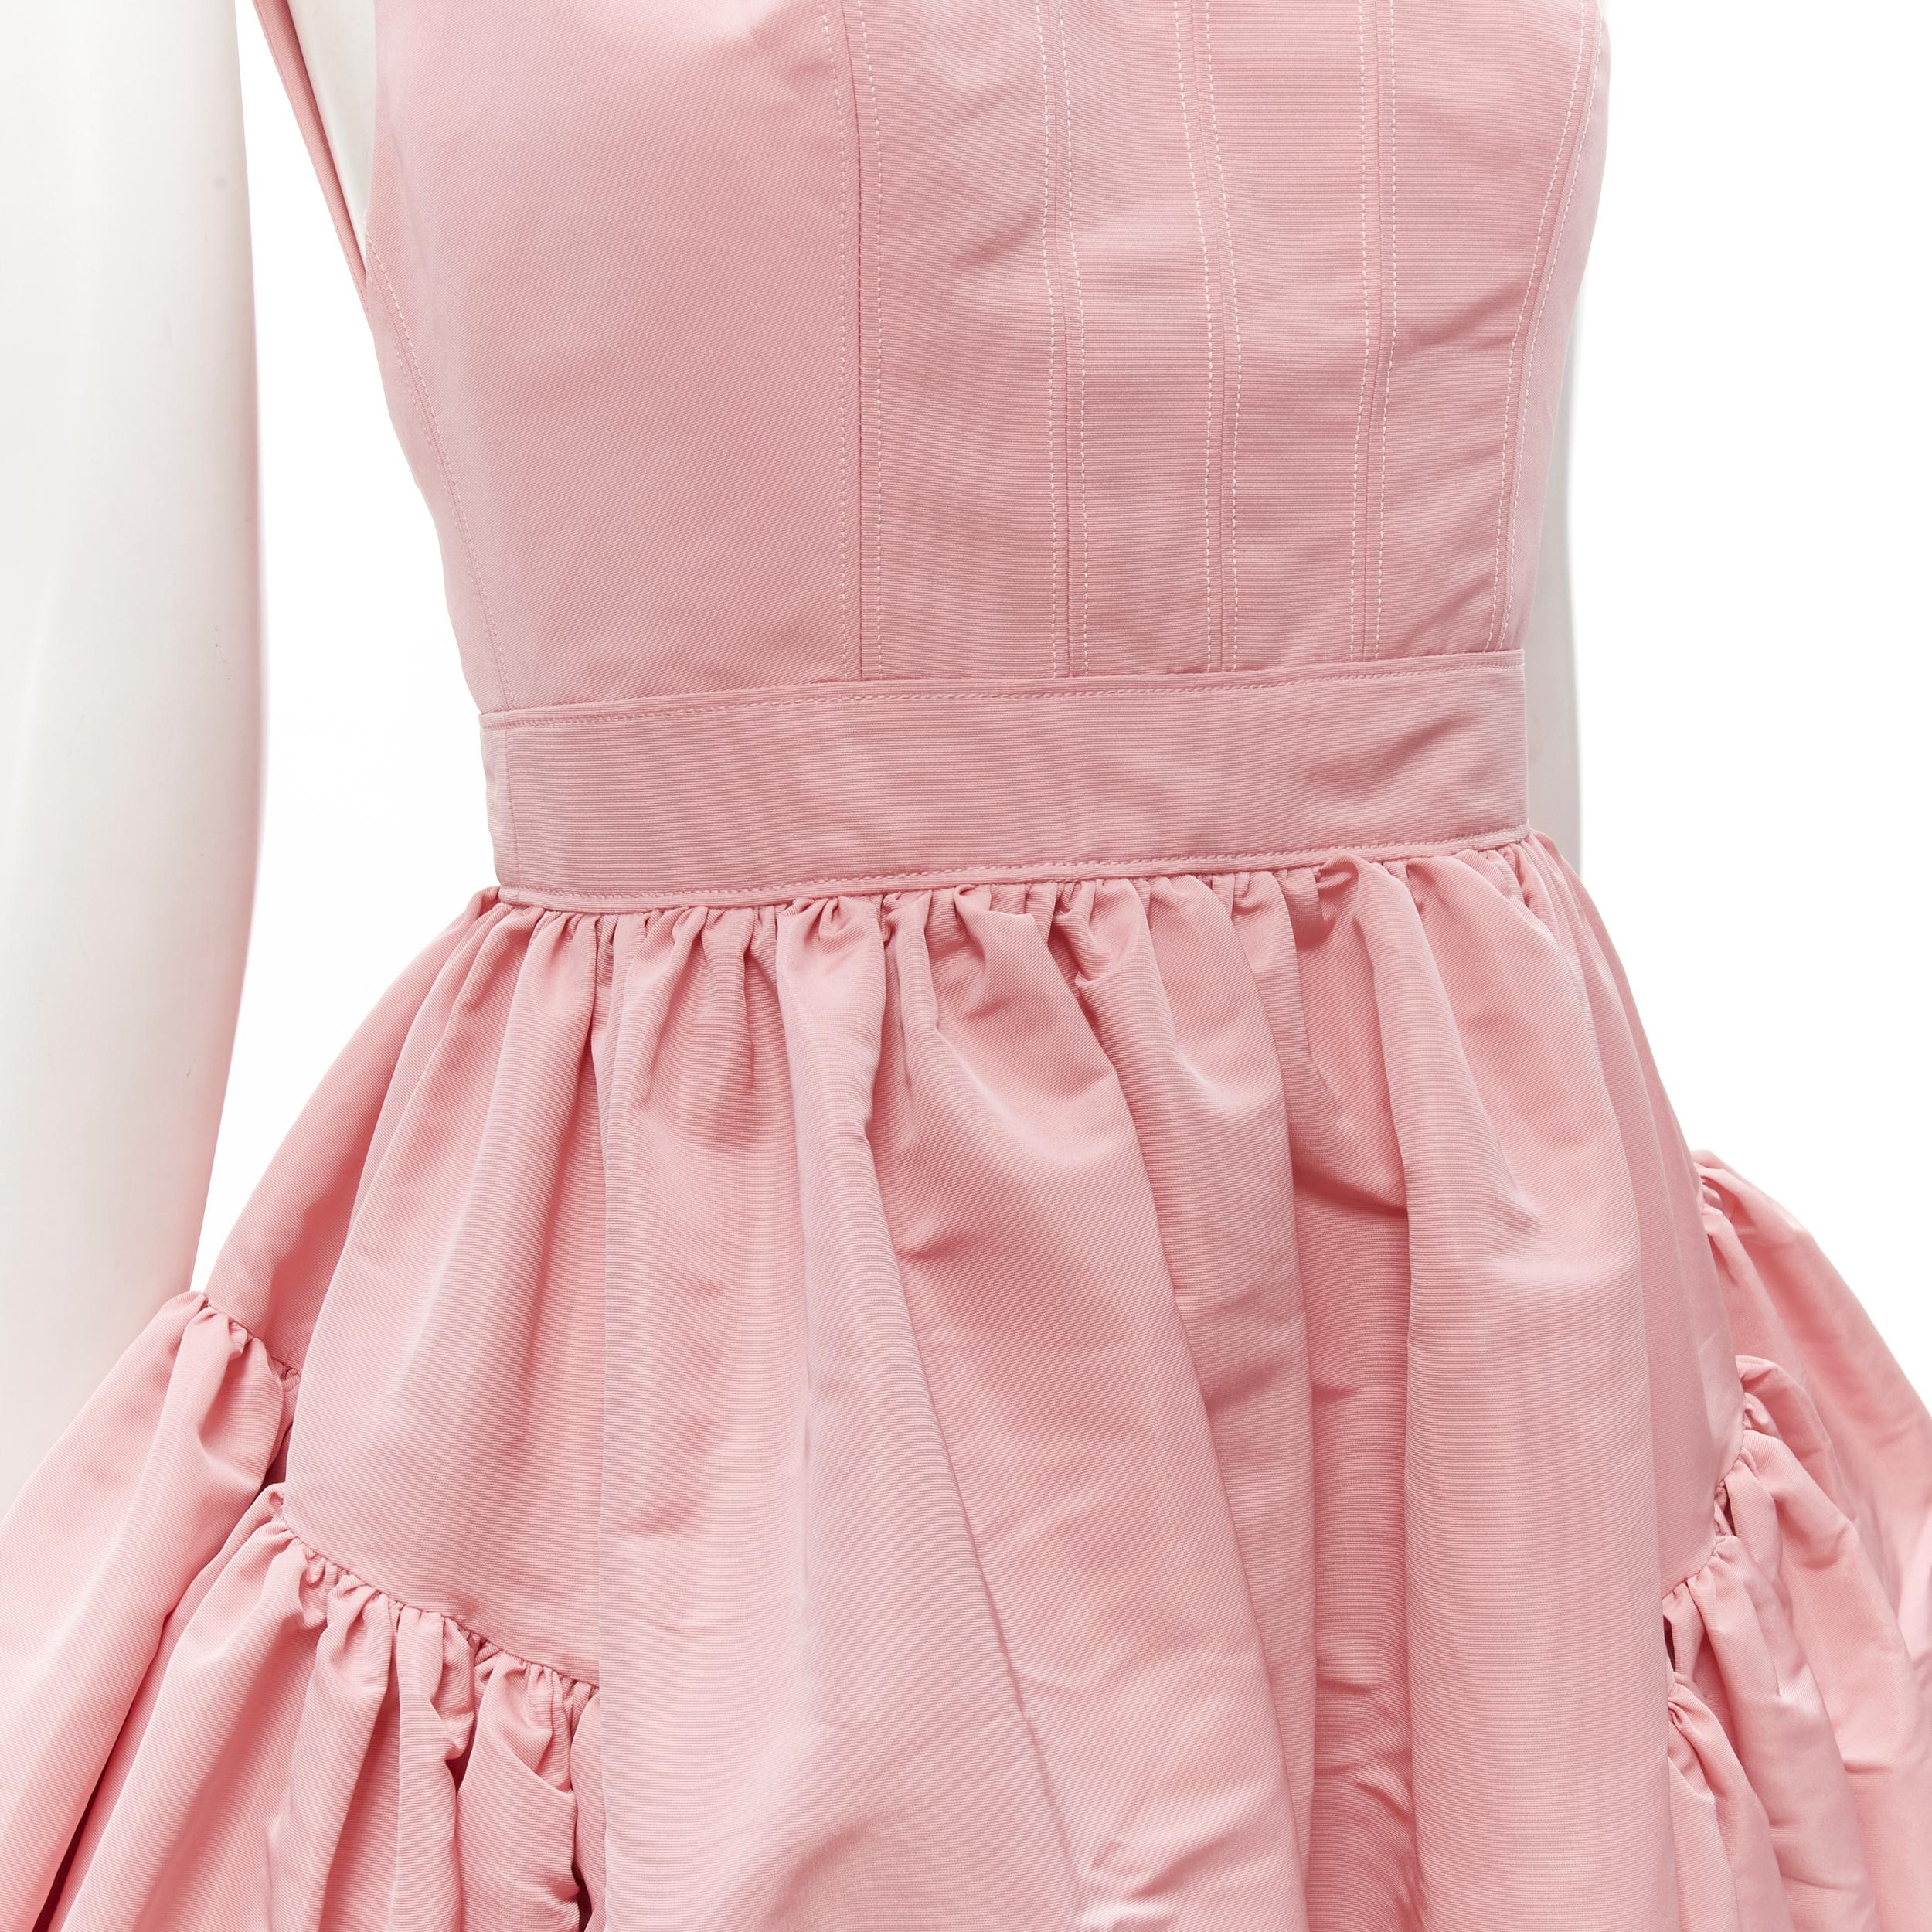 ALEXANDER MCQUEEN pastel pink taffeta puff skirt midi gown dress IT36 XS
Brand: Alexander McQueen
Collection: 2021 
Material: Polyester
Color: Pink
Pattern: Solid
Closure: Zip
Extra Detail: Scoop neckline. Corset seams at bust. Fitted waist. Flared